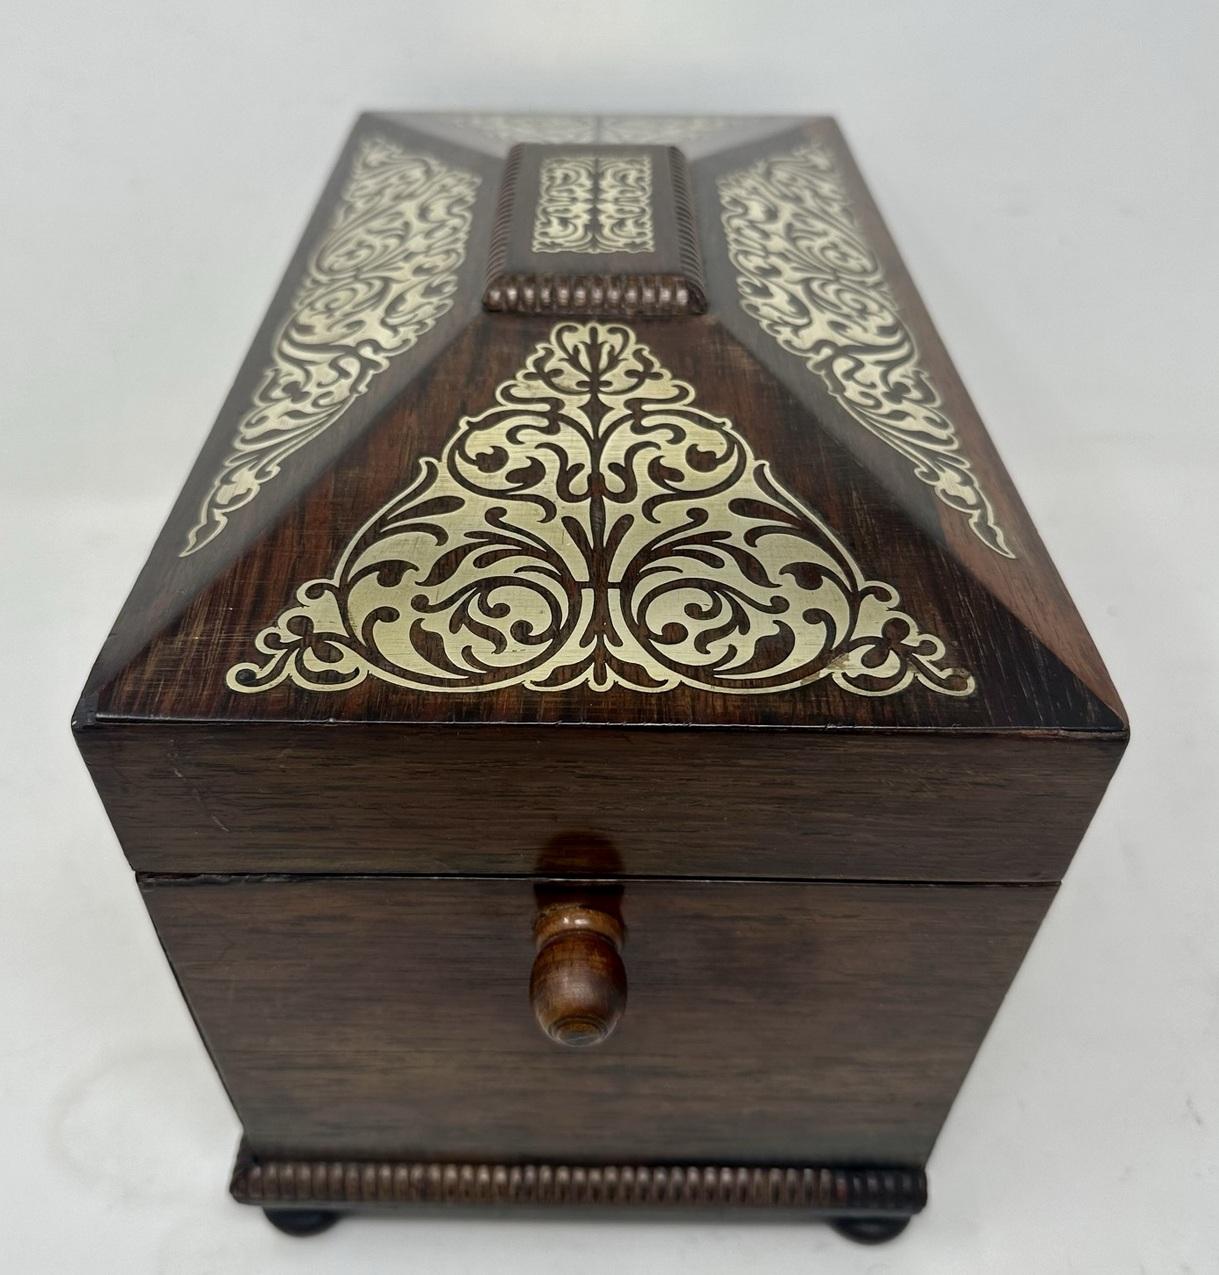 19th Century Antique Brass Inlaid Mahogany English Tea Caddy Box Regency Gillows Lancaster For Sale